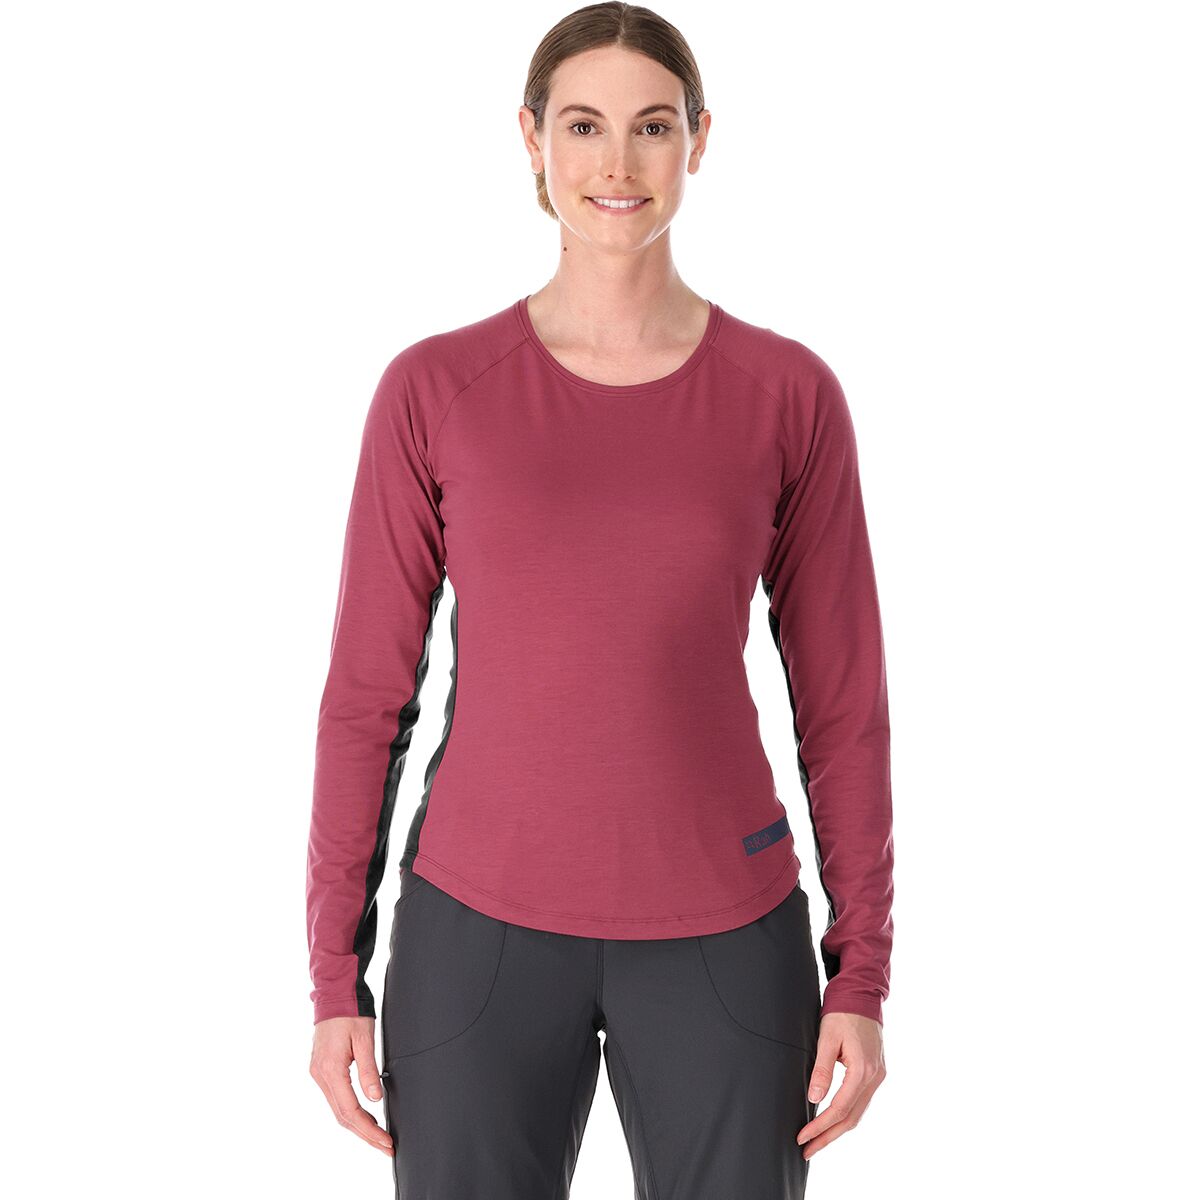 Rab Lateral Long-Sleeve T-Shirt - Women's - Clothing